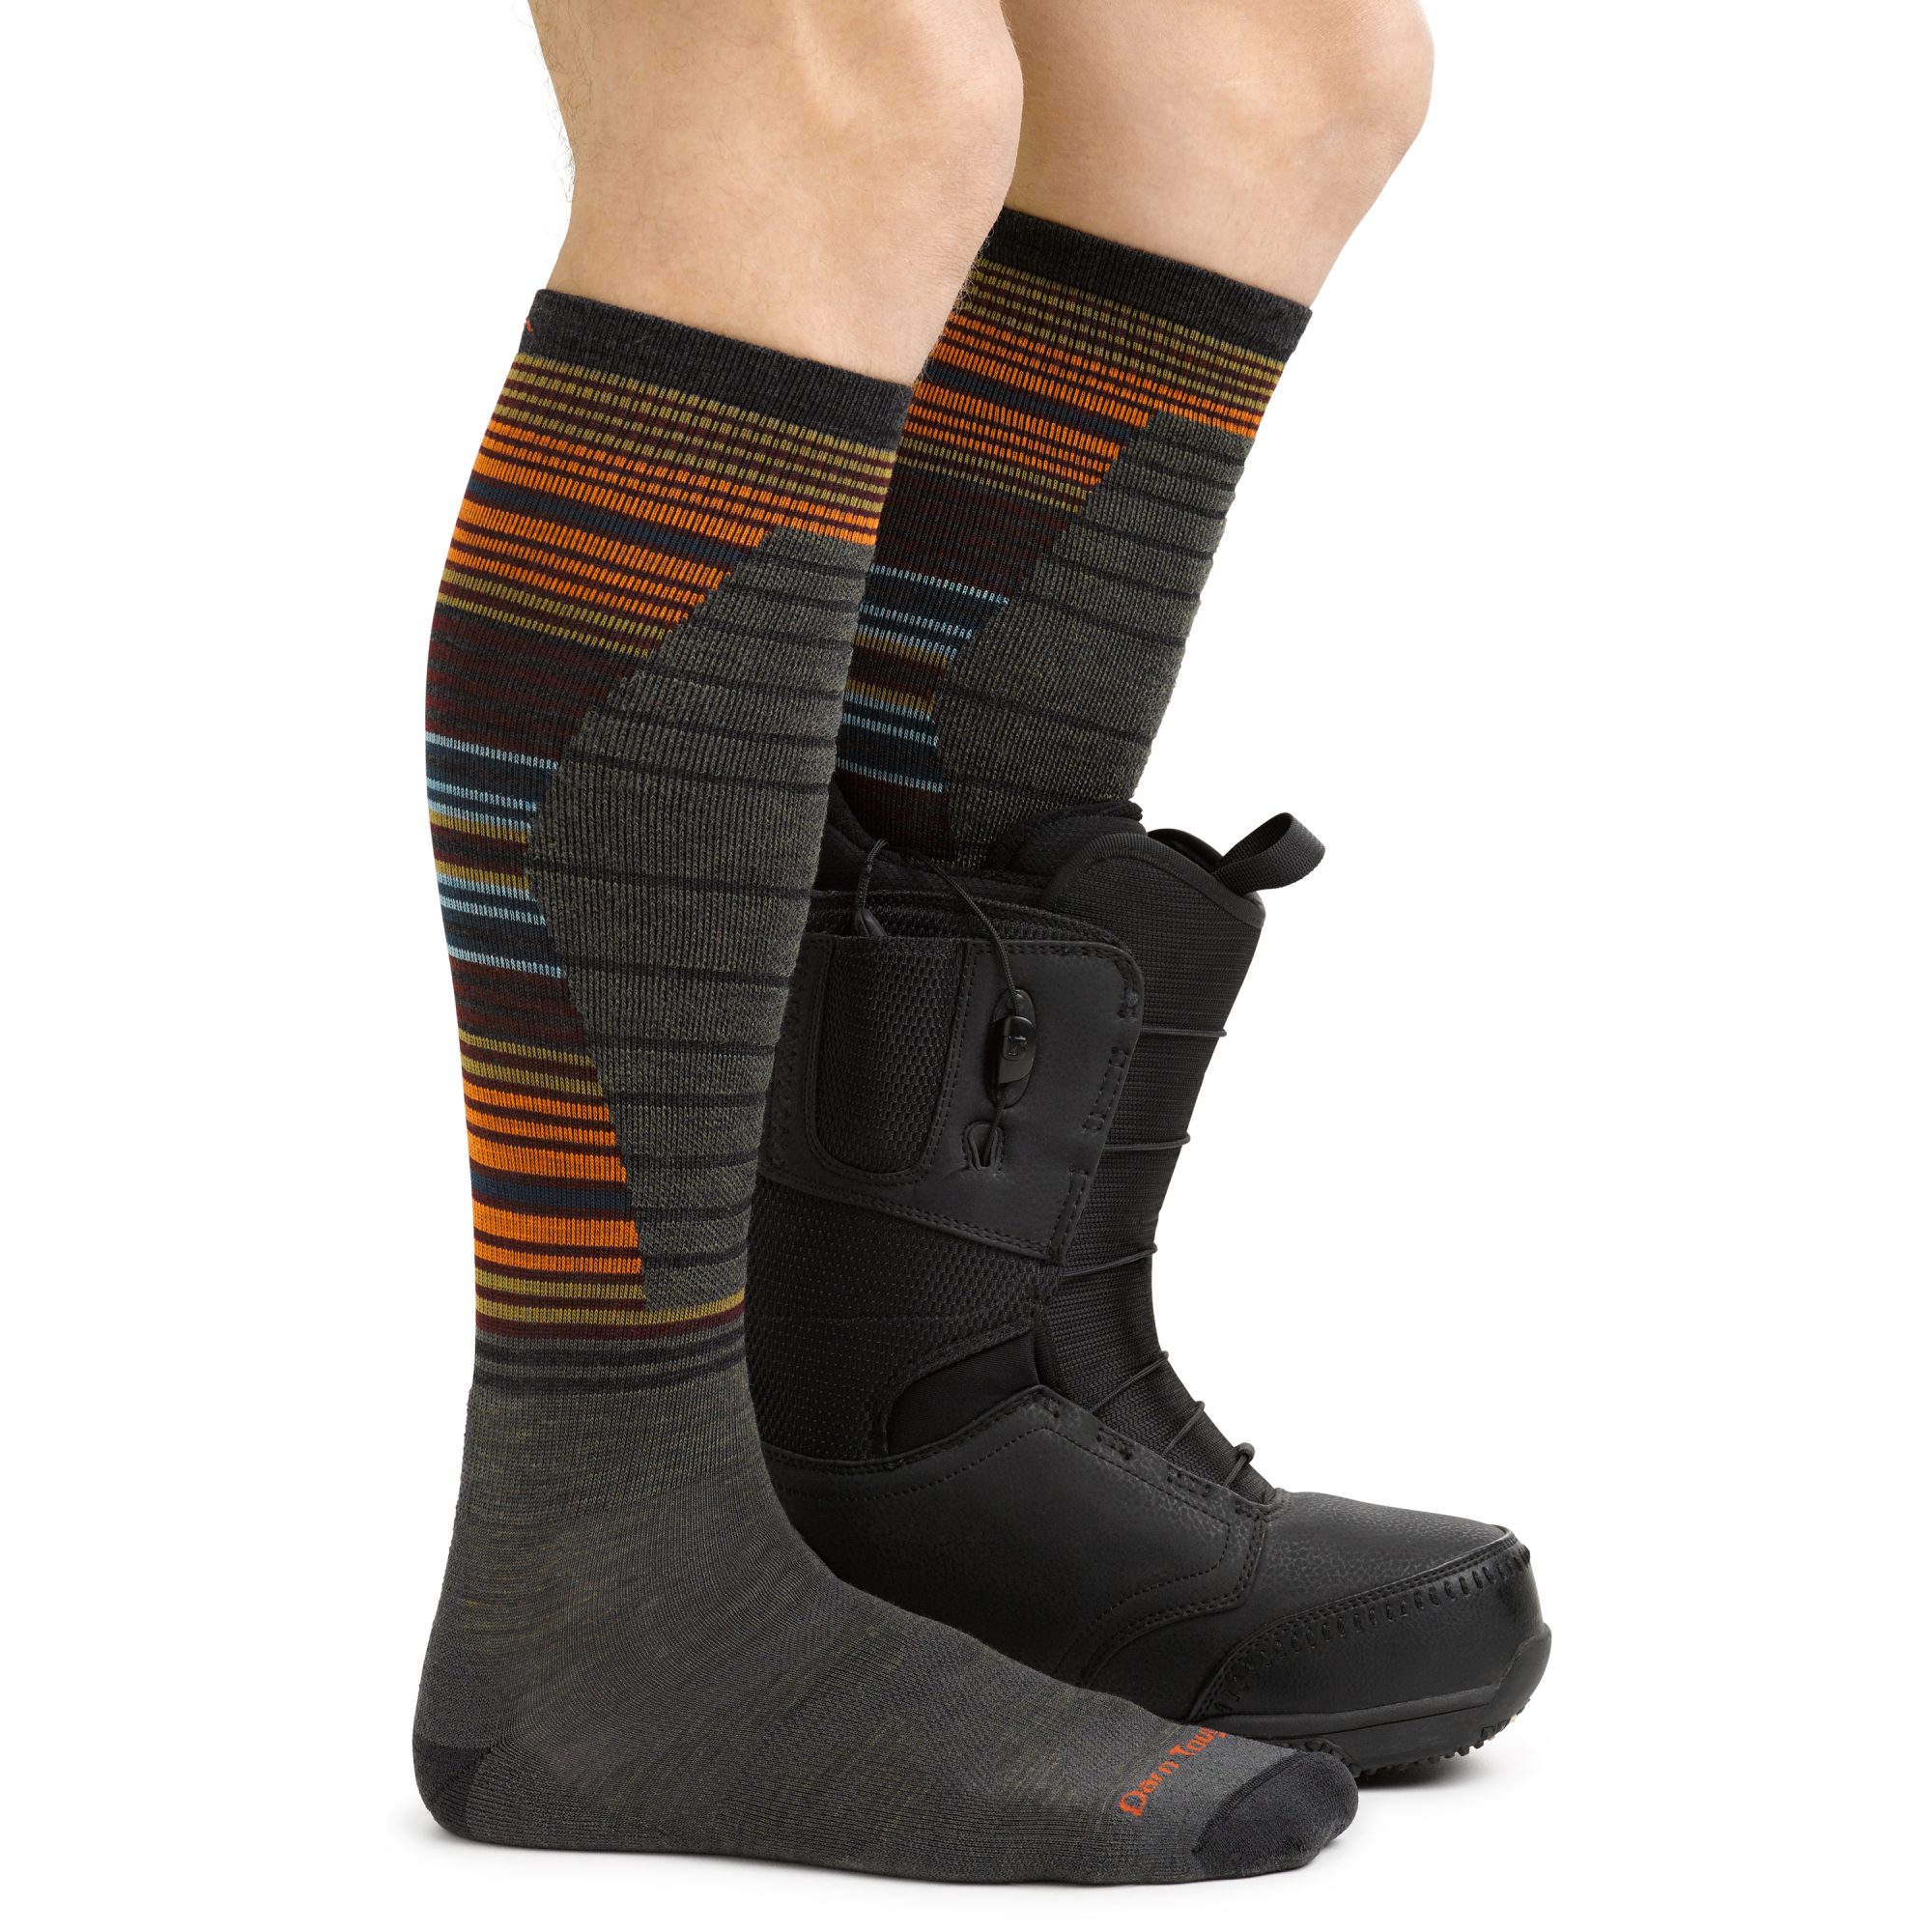 Men's Backwoods Snowboard and Ski Socks in Forest on foot with snowboard boot